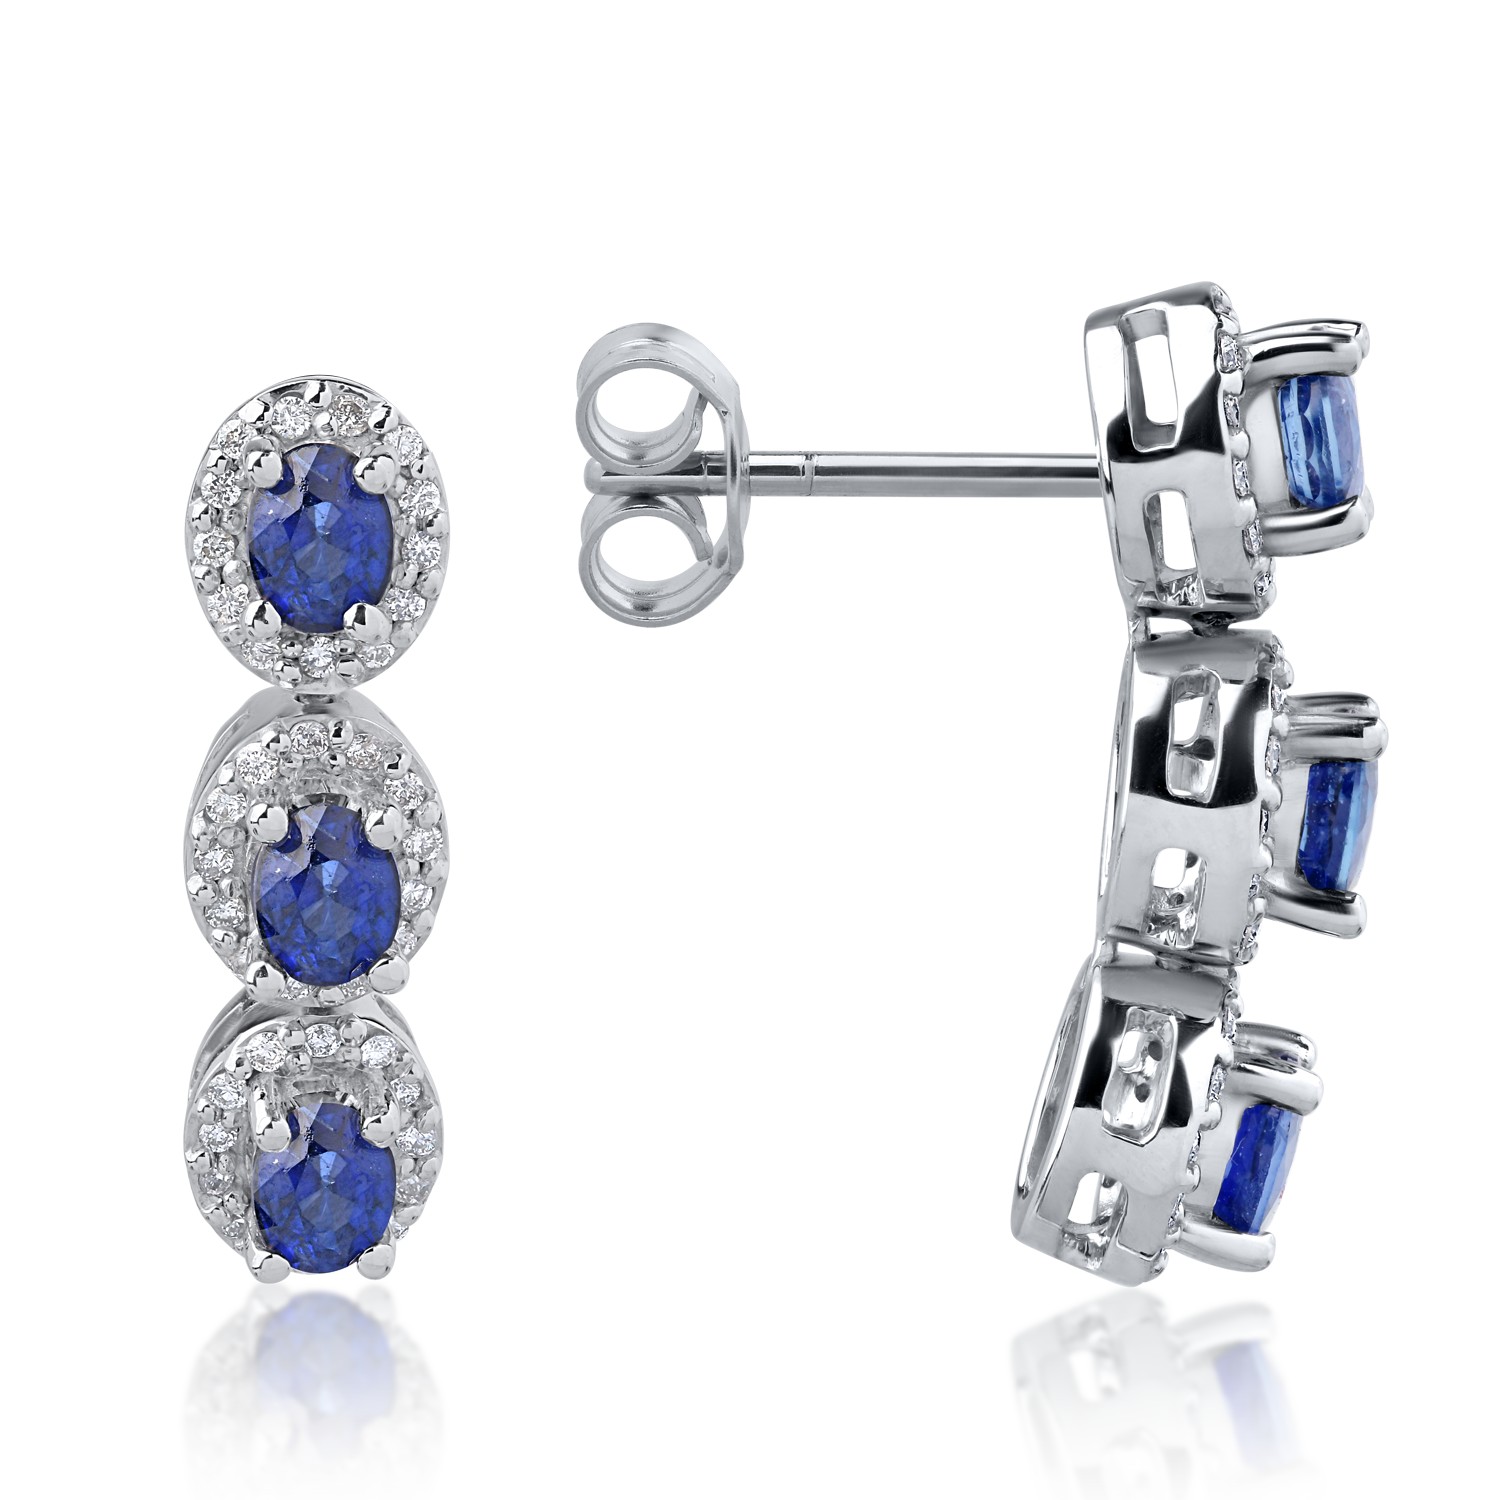 18K white gold earrings with 1.53ct sapphires and 0.22ct diamonds